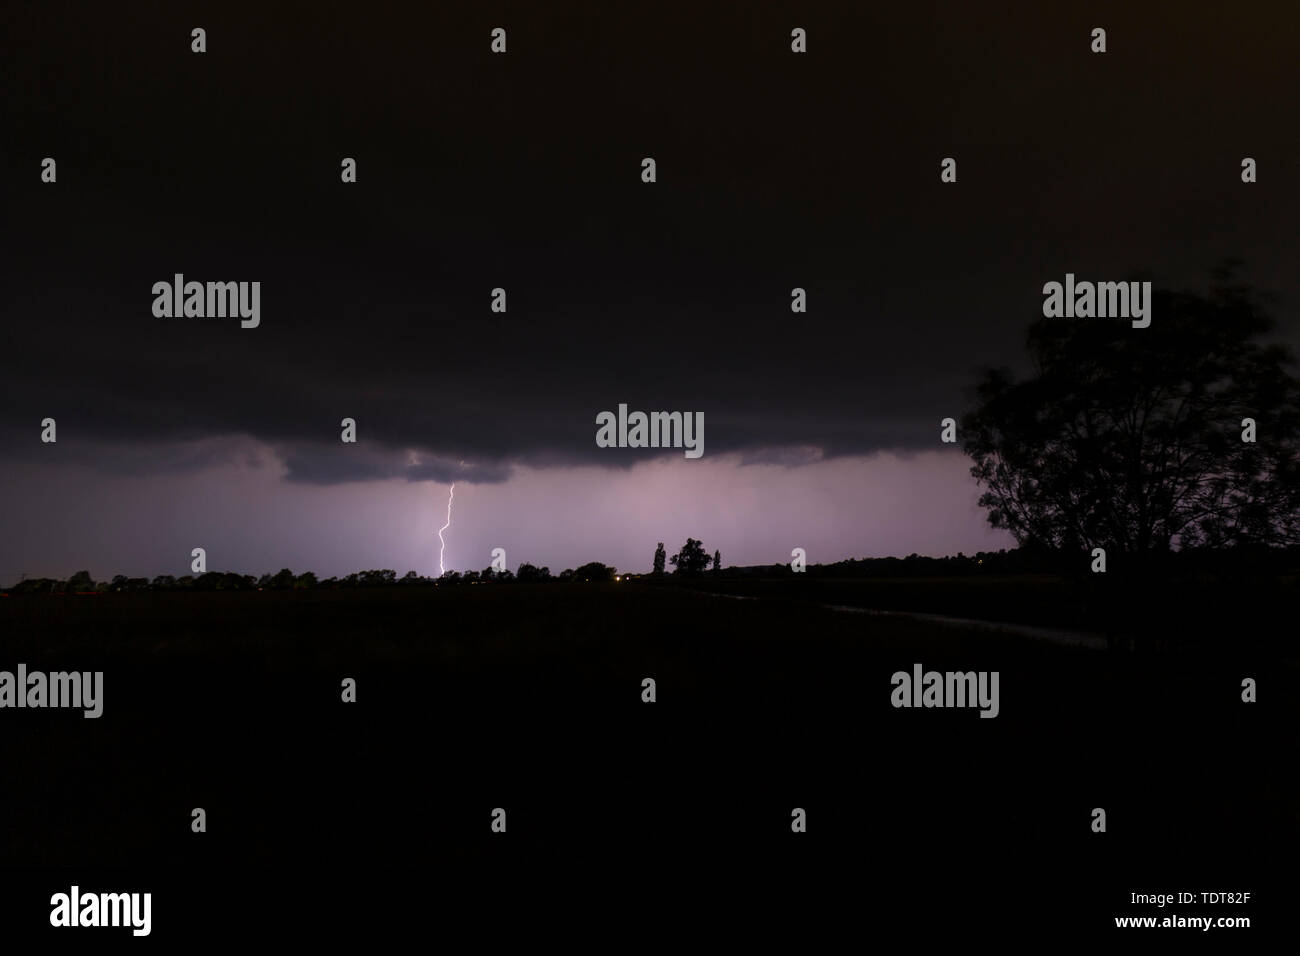 Ashford, Kent, UK. 18th Jun, 2019. UK Weather: The expected storm arrives with flashes of lightning and thunder across Ashford in Kent bringing huge amounts of rain. © Paul Lawrenson 2019, Photo Credit: Paul Lawrenson/ Alamy Live News Stock Photo